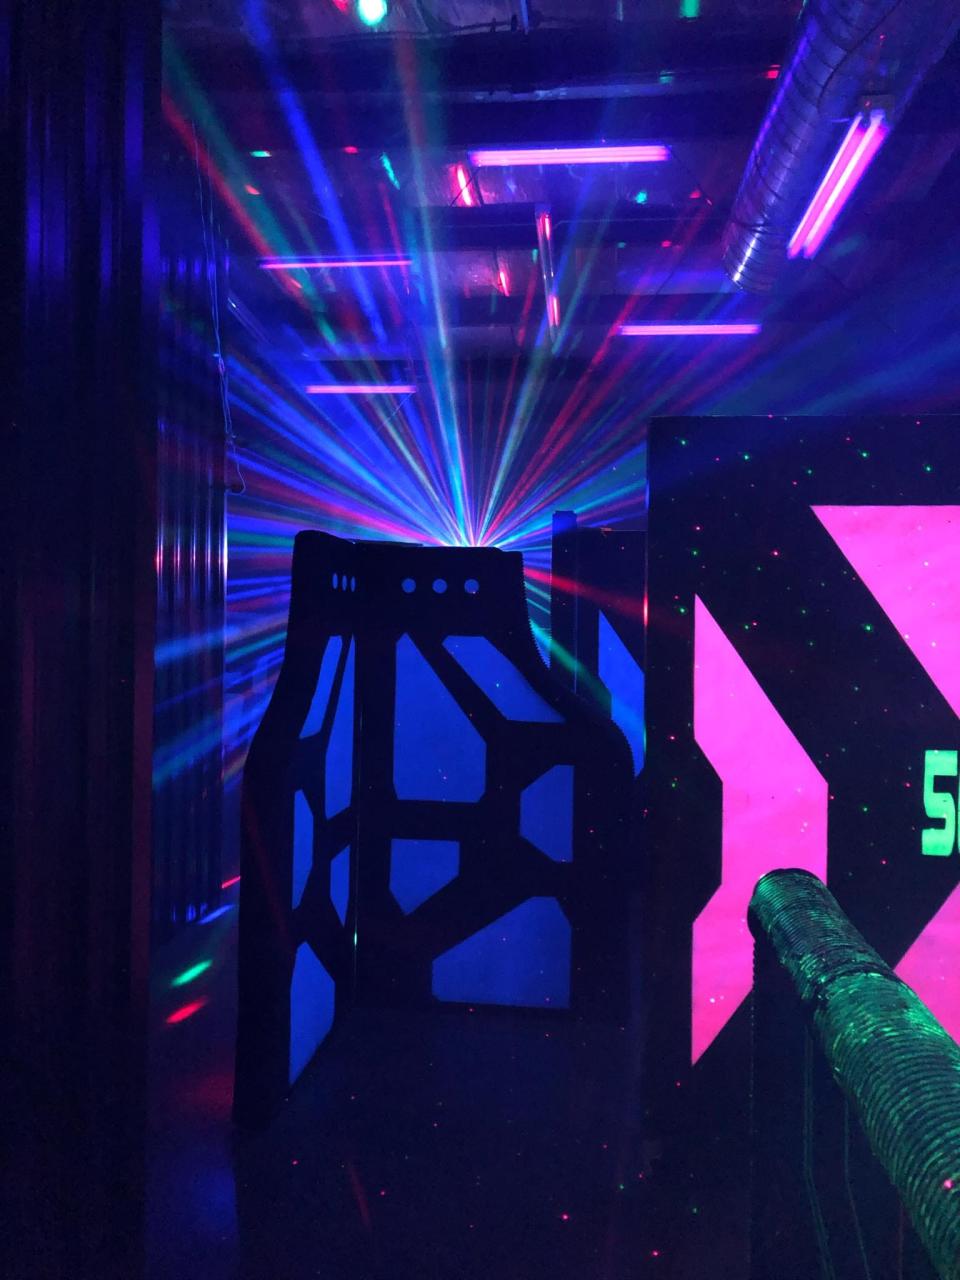 Speed of Light Laser Tag offers laser tag, redemption arcades, bounce house and inflatables rentals, and private parties.